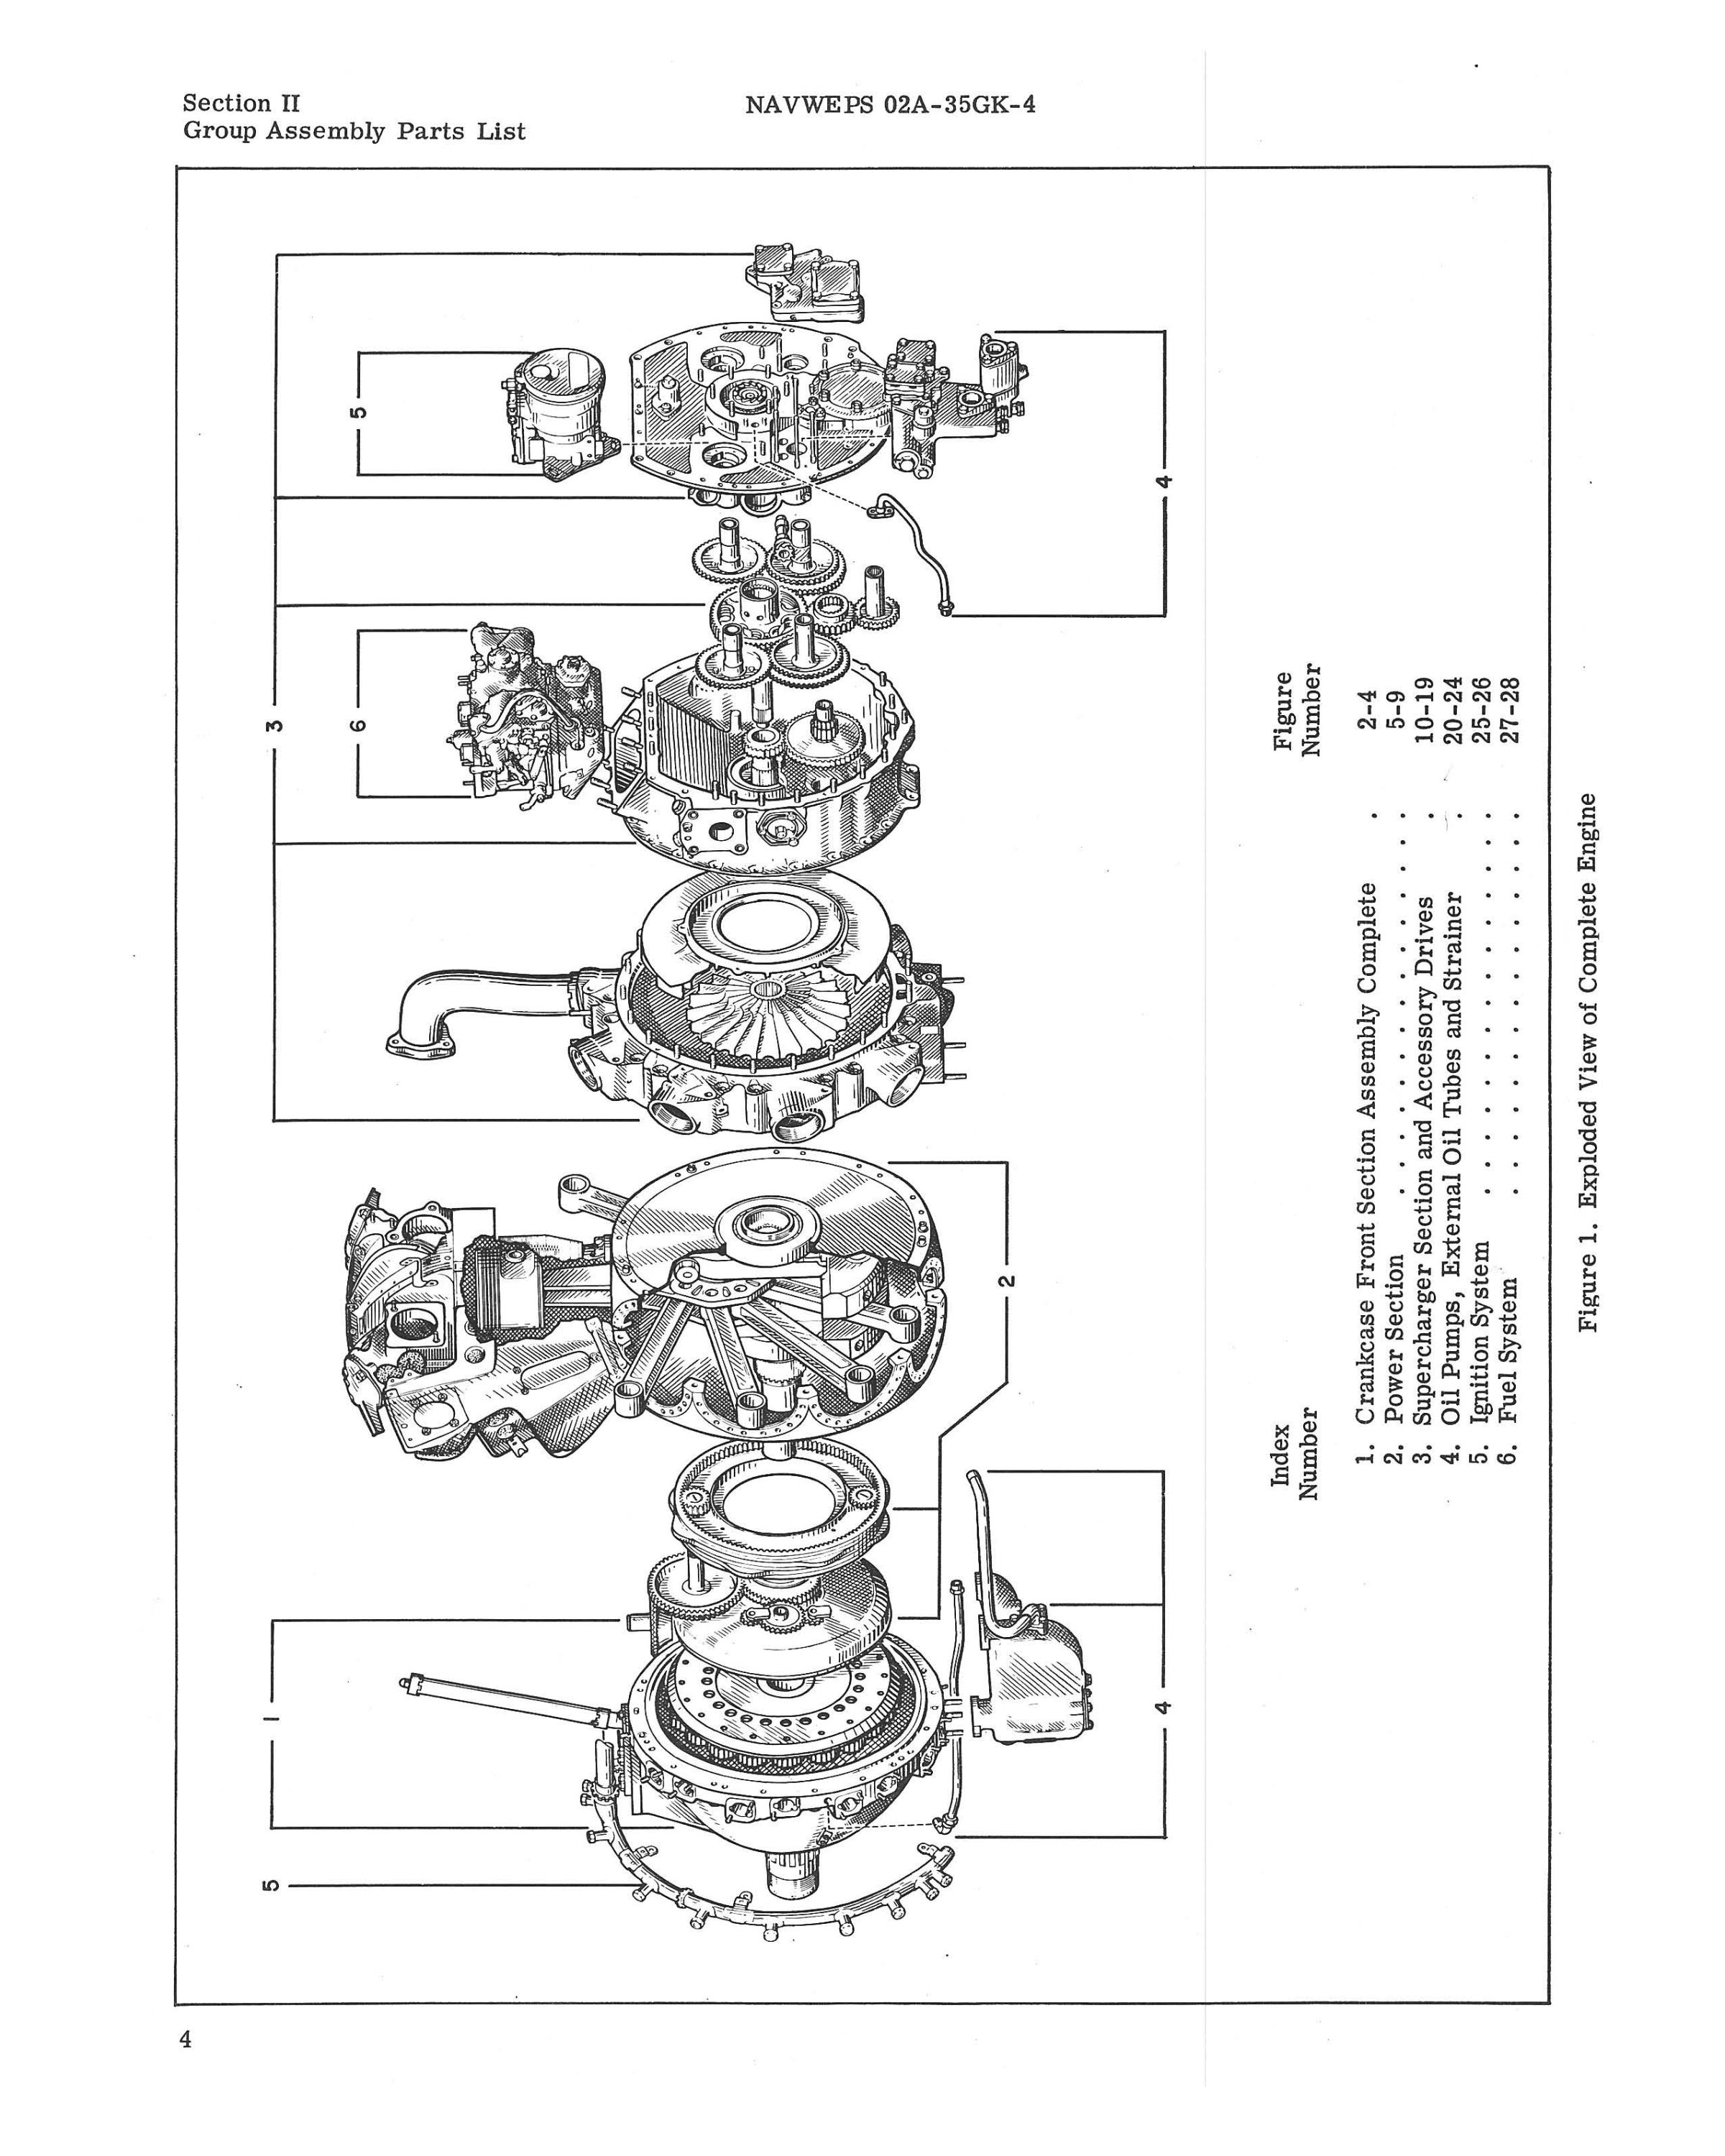 Sample page 10 from AirCorps Library document: Illustrated Parts Breakdown for R-1820-80 Engines